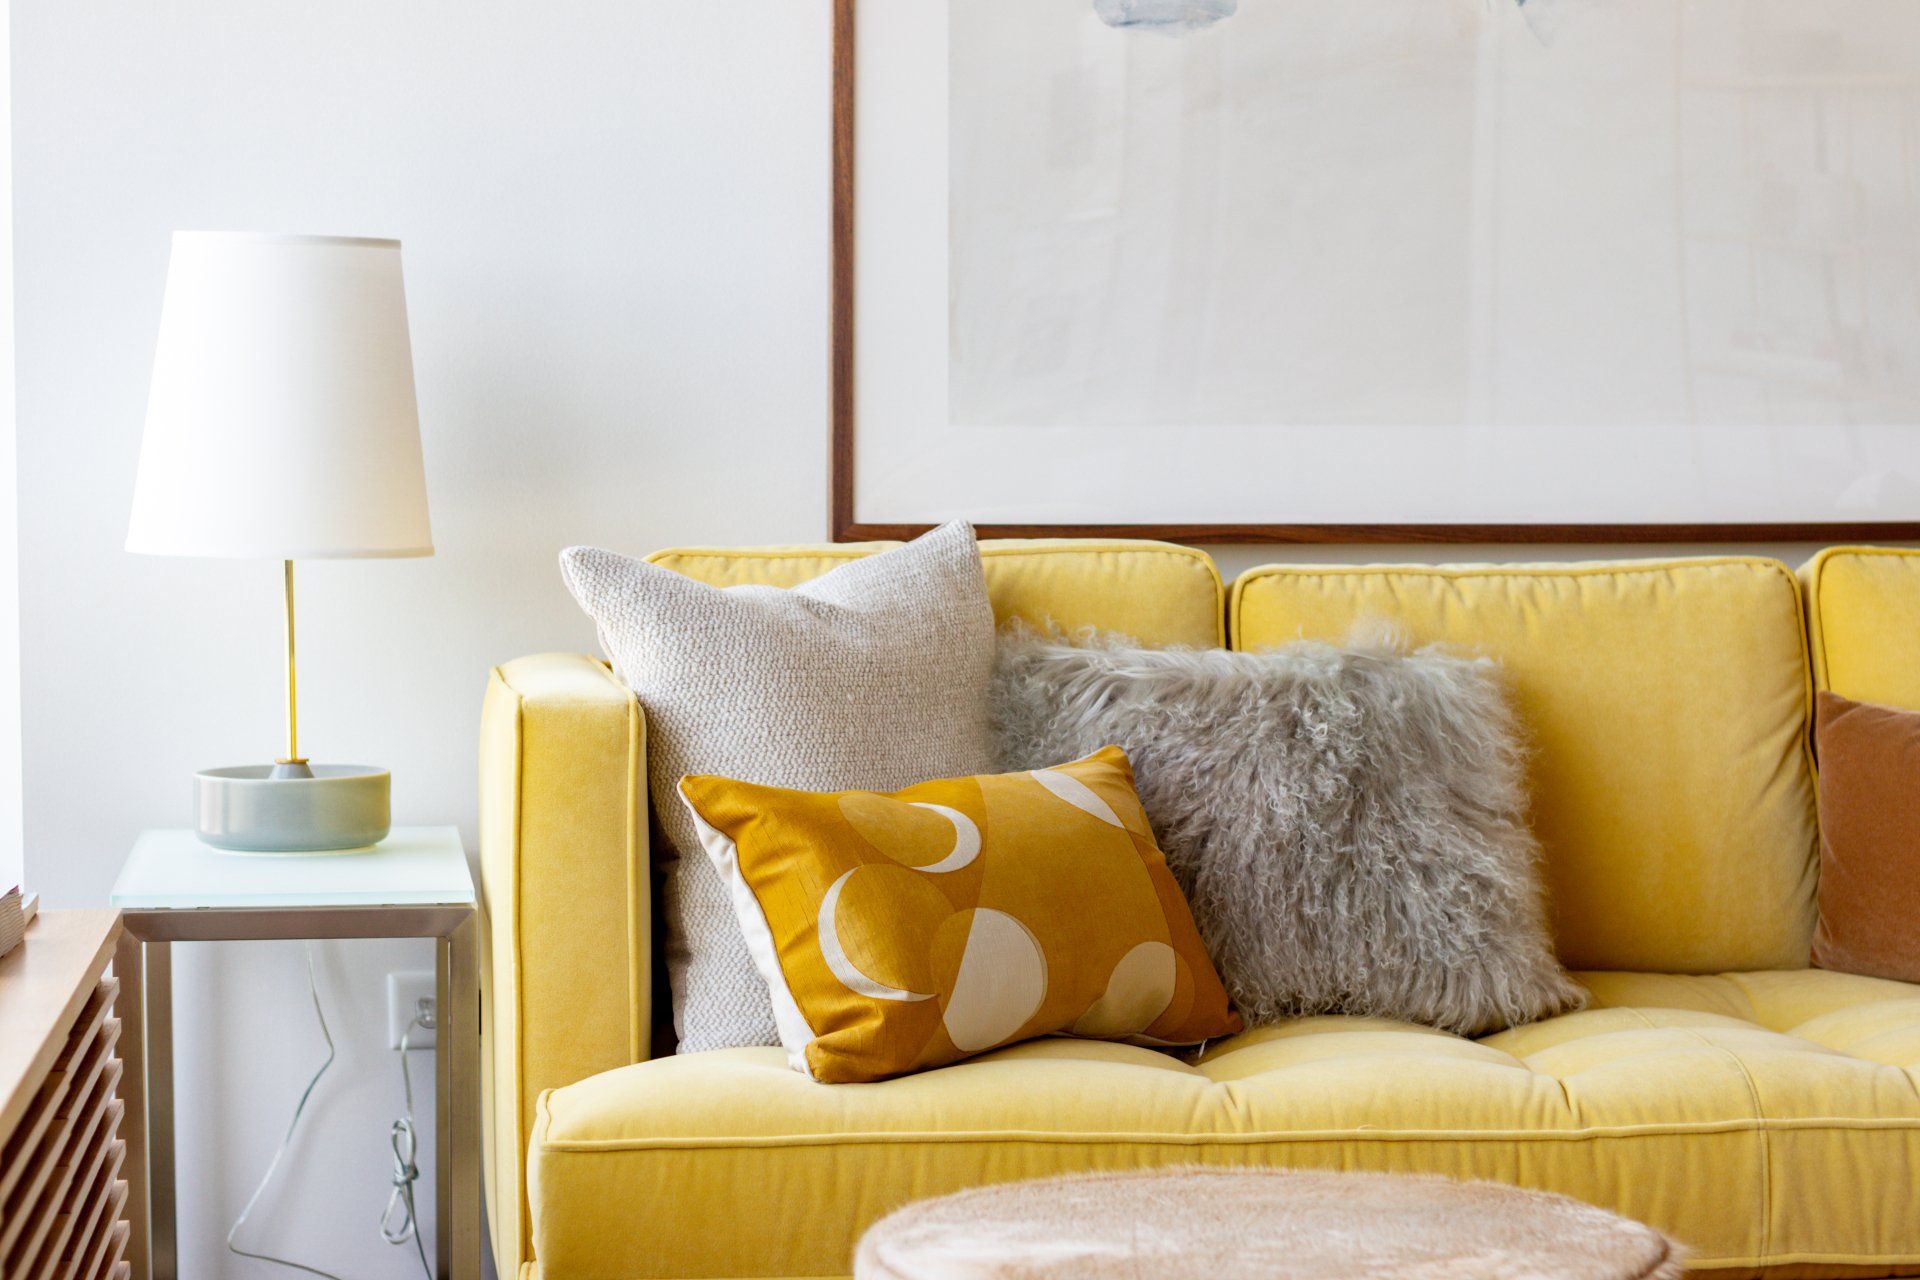 A living room with a yellow couch and pillows at Reside on Green Street.